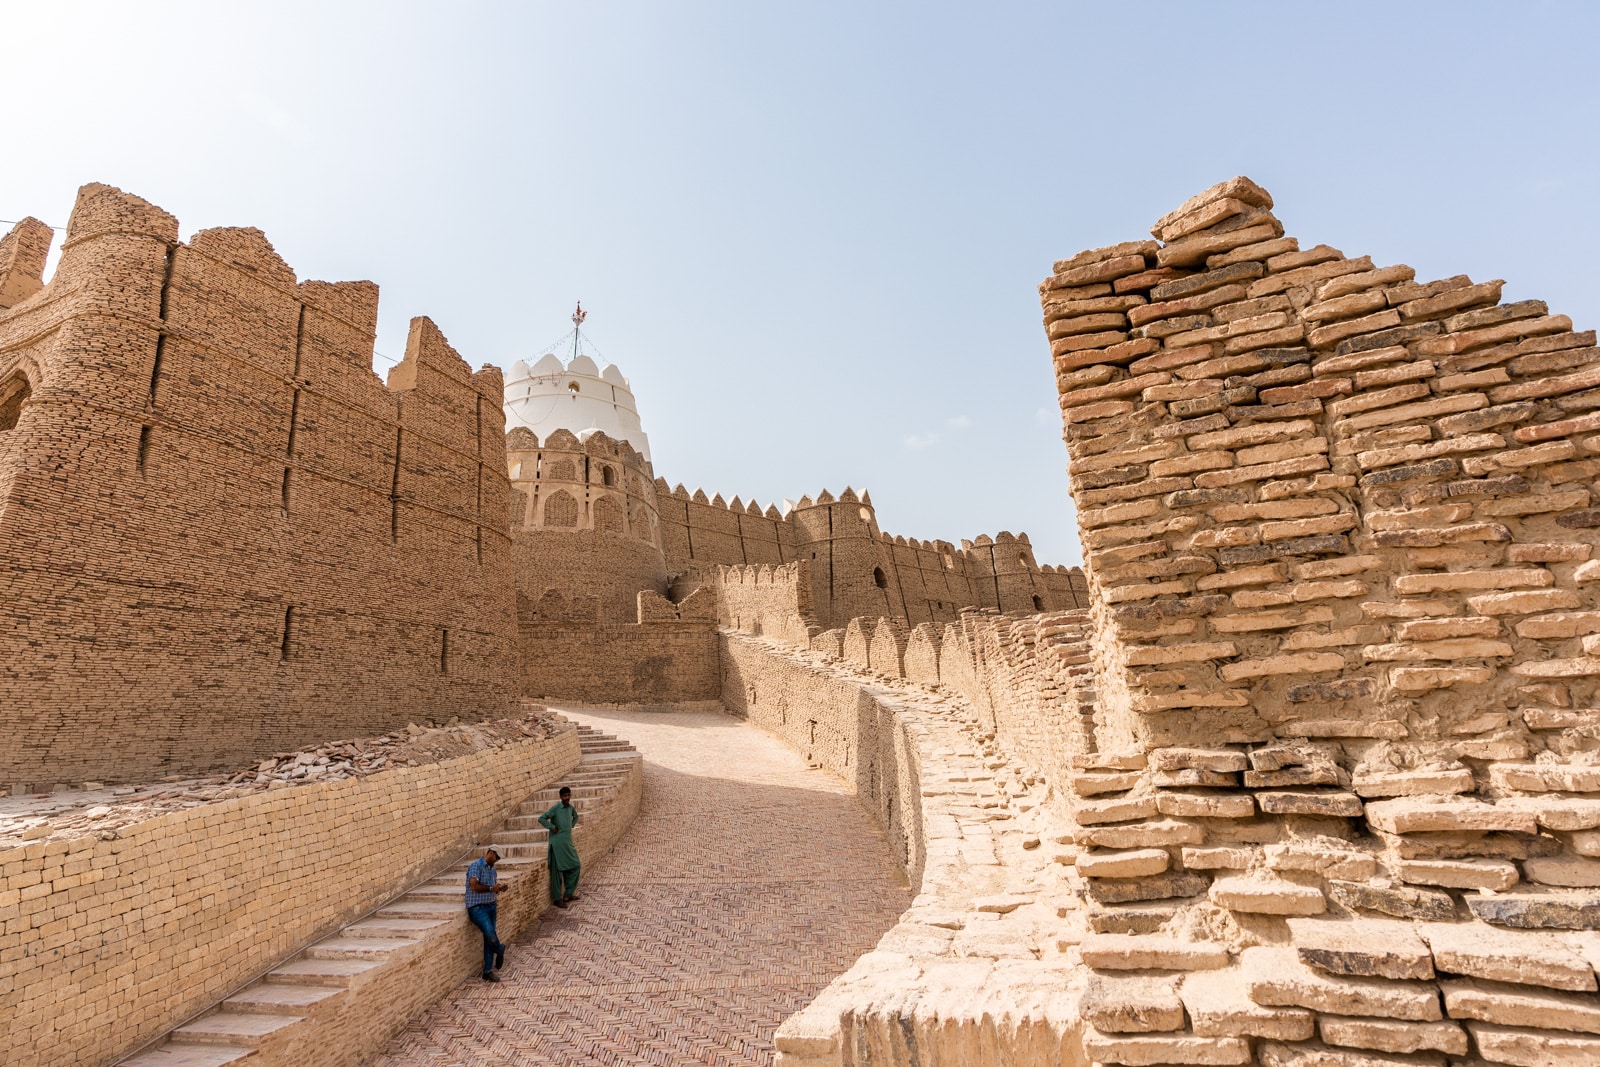 Sindh travel guide - Entry walkway to Kot Diji Fort - Lost With Purpose travel blog?